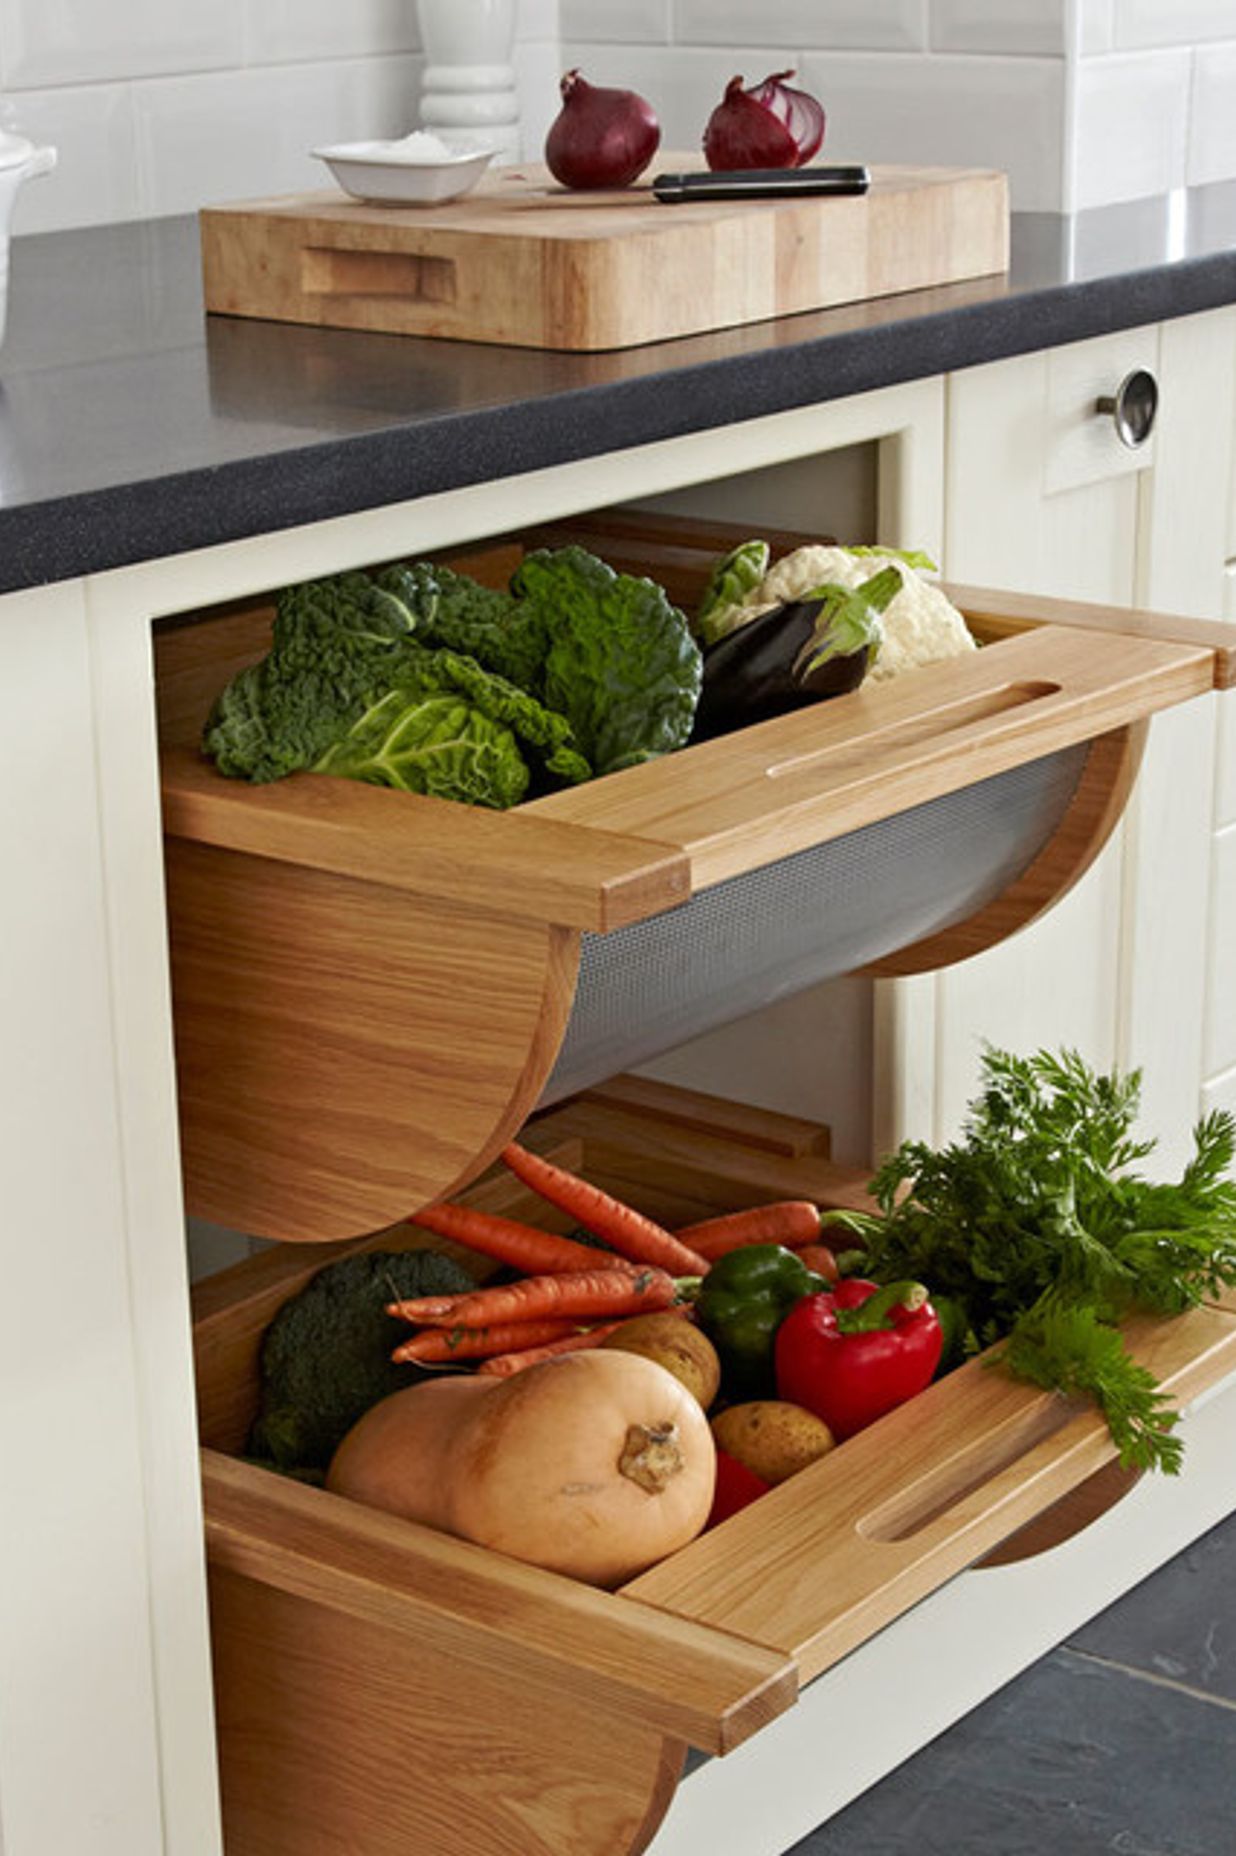 Example of a Vegetable Drawer | Photo Credit – Hafele